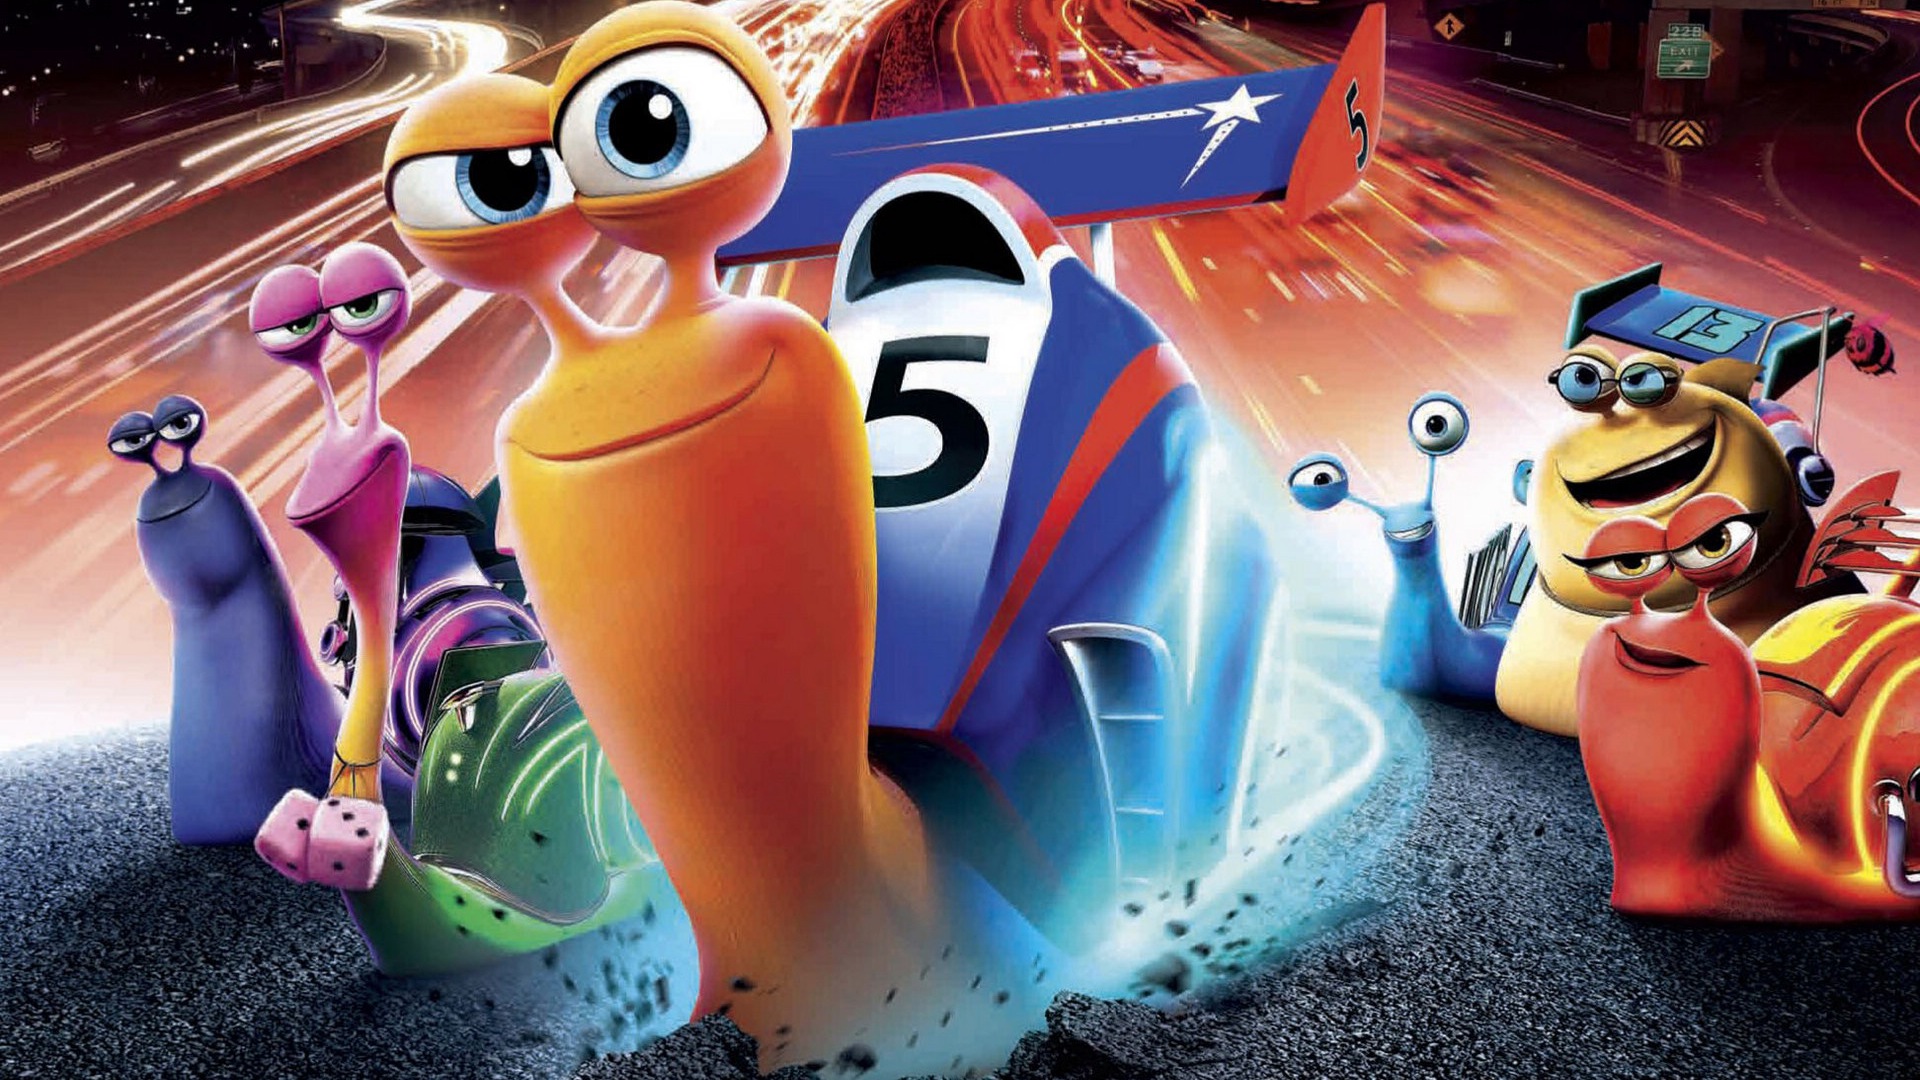 Turbo 3D movie HD wallpapers #2 - 1920x1080